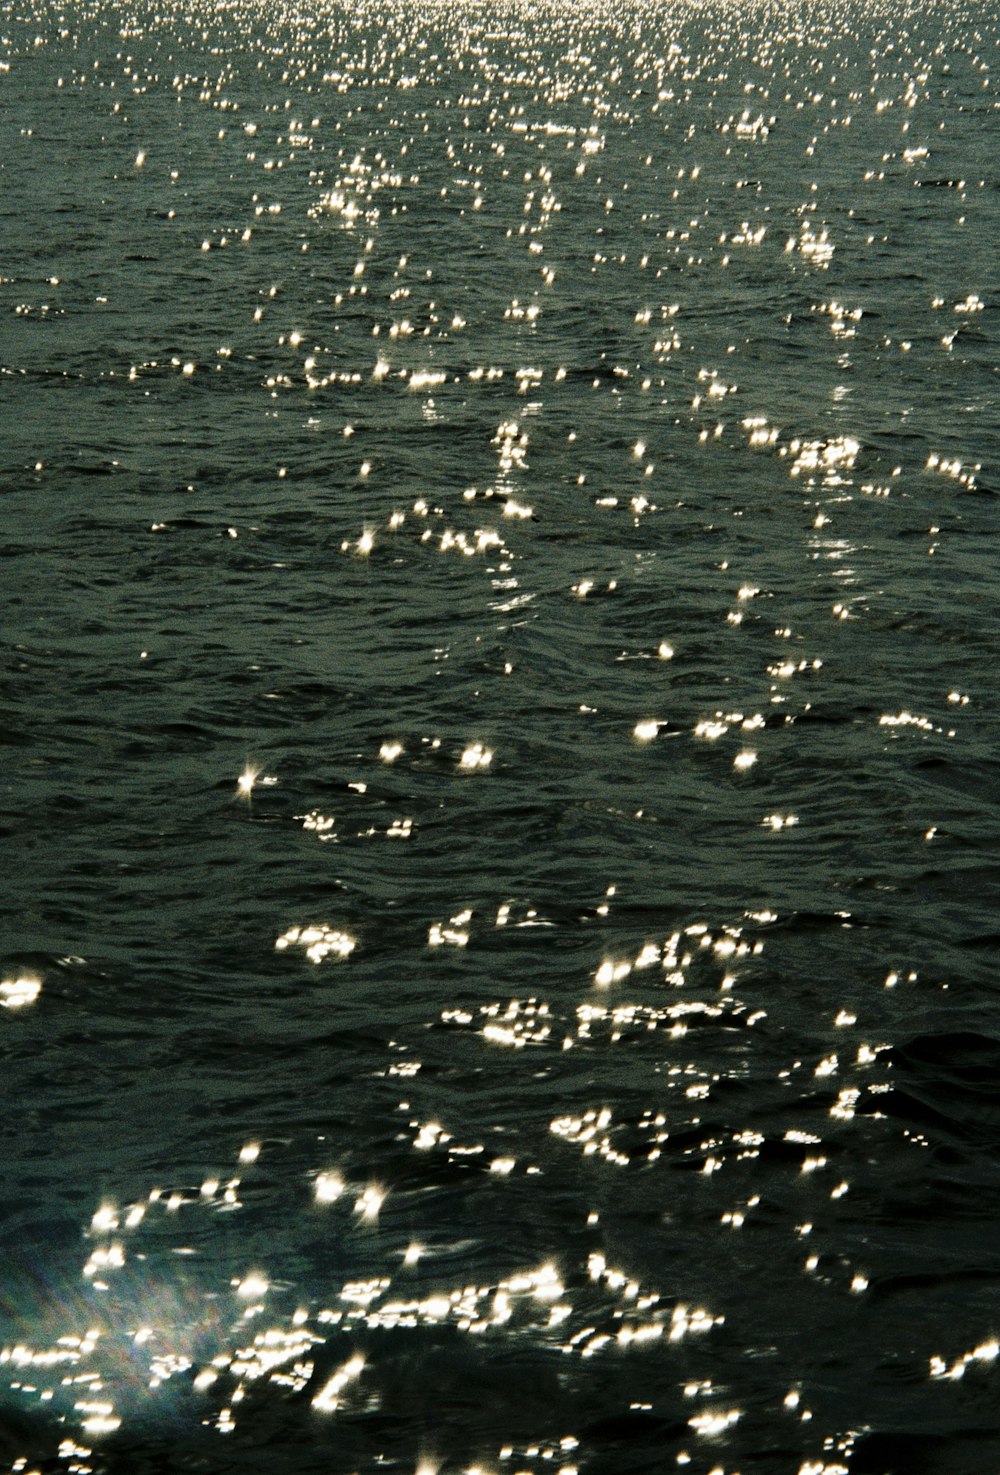 a body of water with many small white objects in it